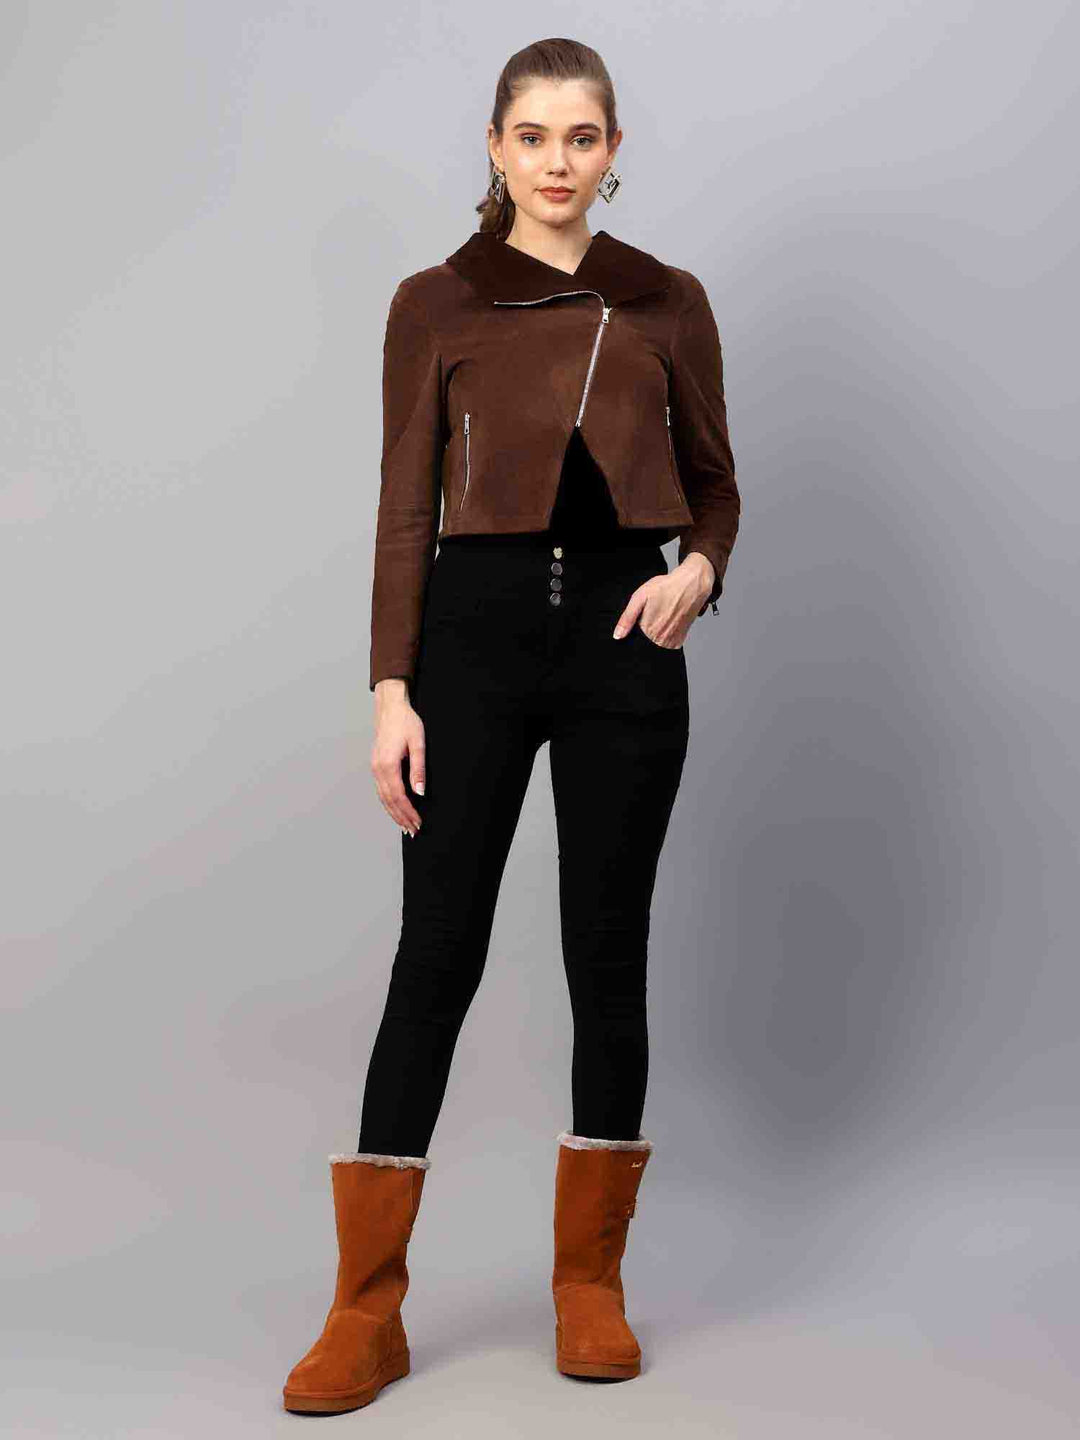 Chic Brown Leather Jacket with Spread Collar for Women